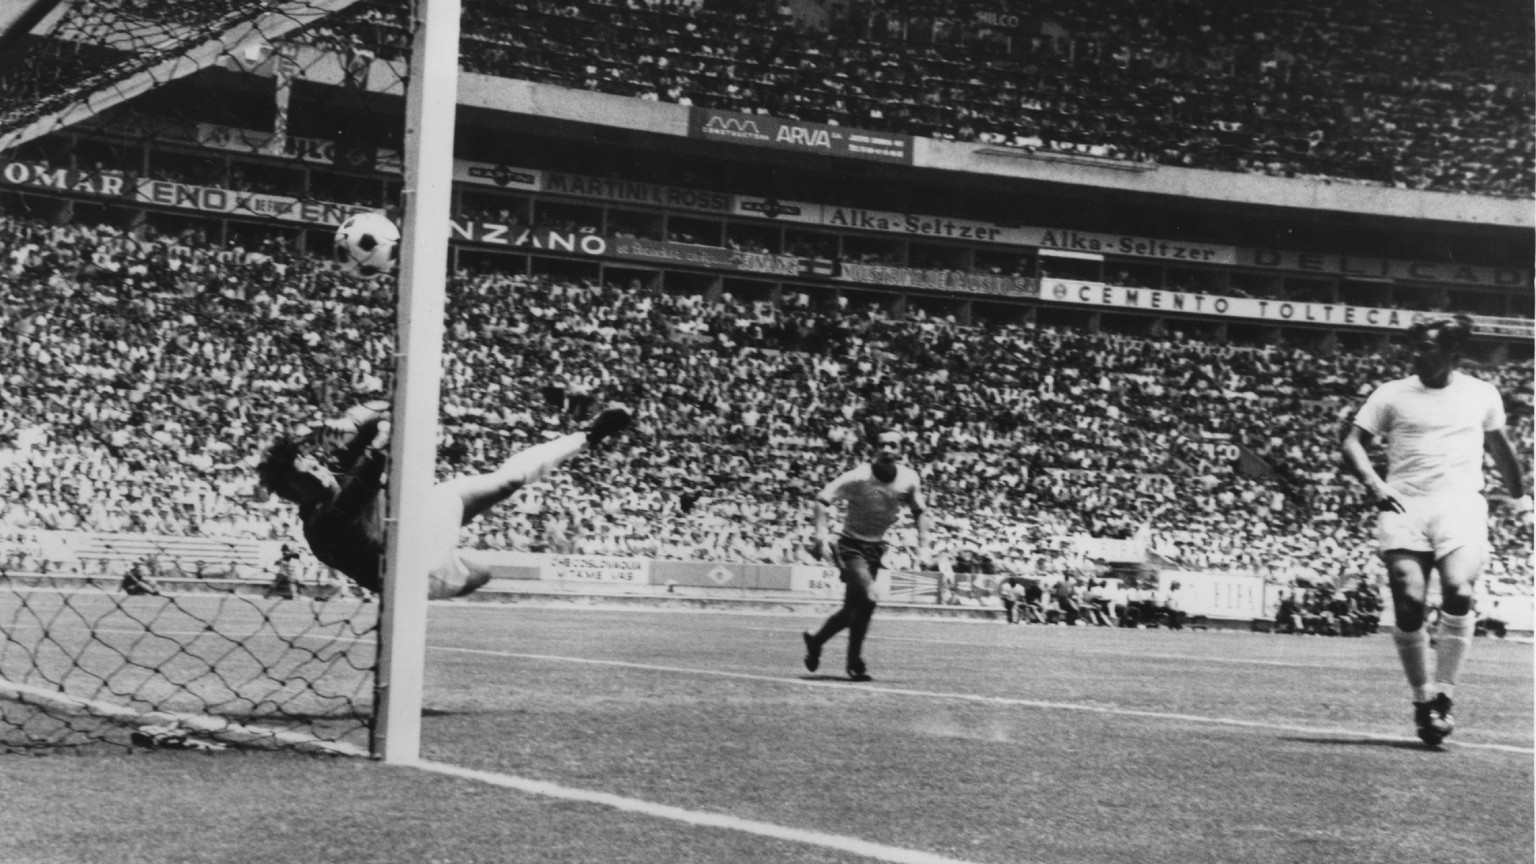 England goalkeeper Gordon Banks makes a remarkable save from a header by Pele of Brazil during their first round match in the World Cup at Guadalajara, Mexico, June 1970. Brazil went on to win 1-0. Ma ...